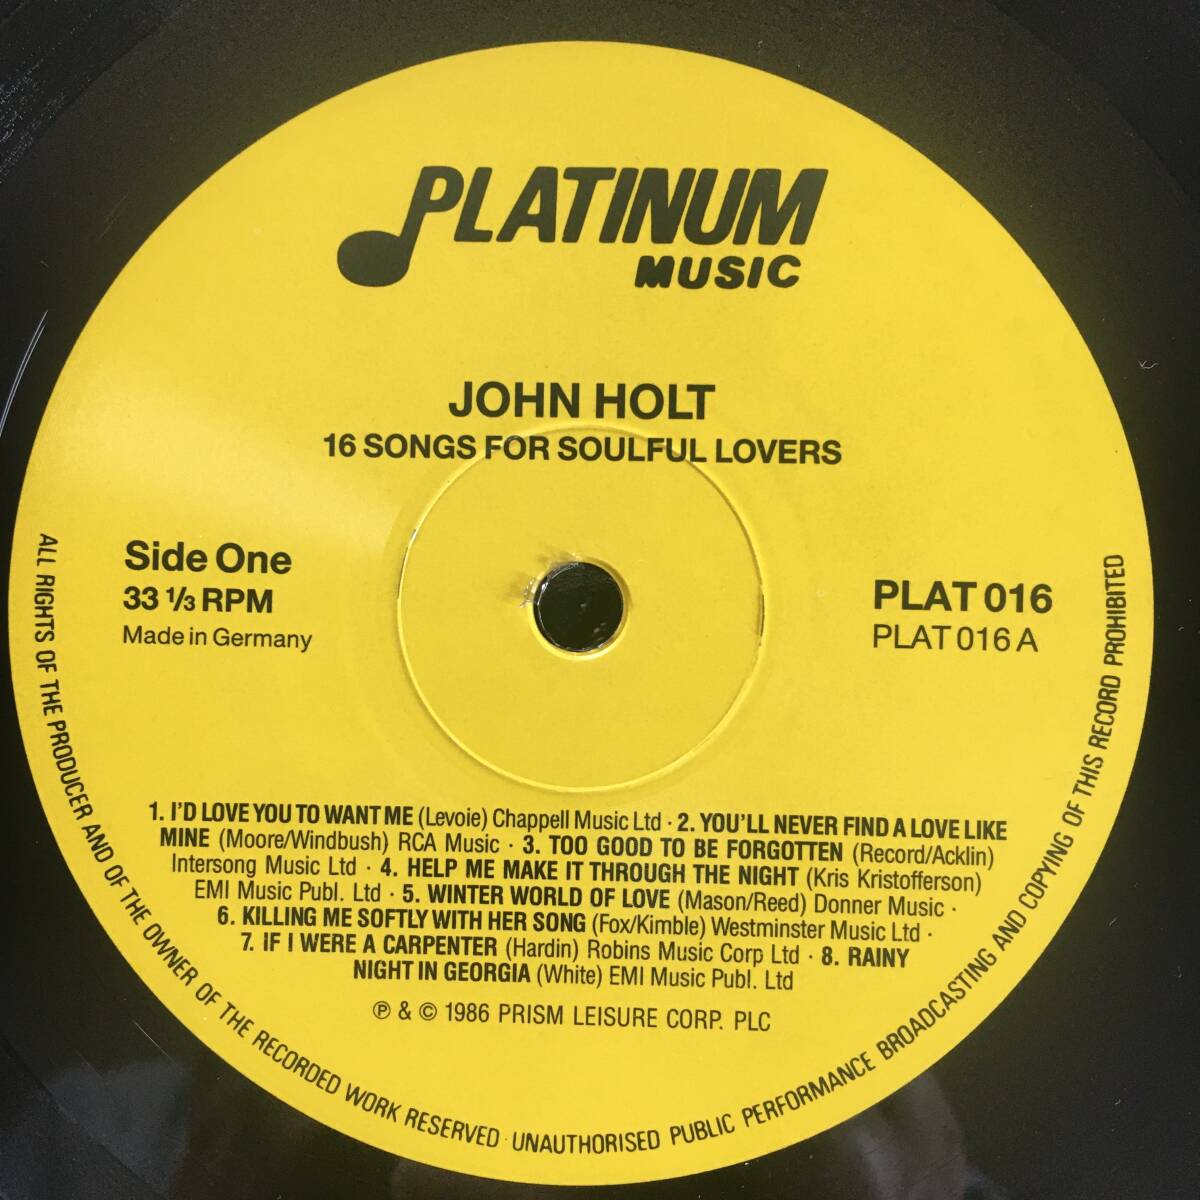 John Holt / 16 Songs For Soulful Lovers [Platinum Music - PLAT 016, Prism Leisure Corporation - PLAT 016]の画像3